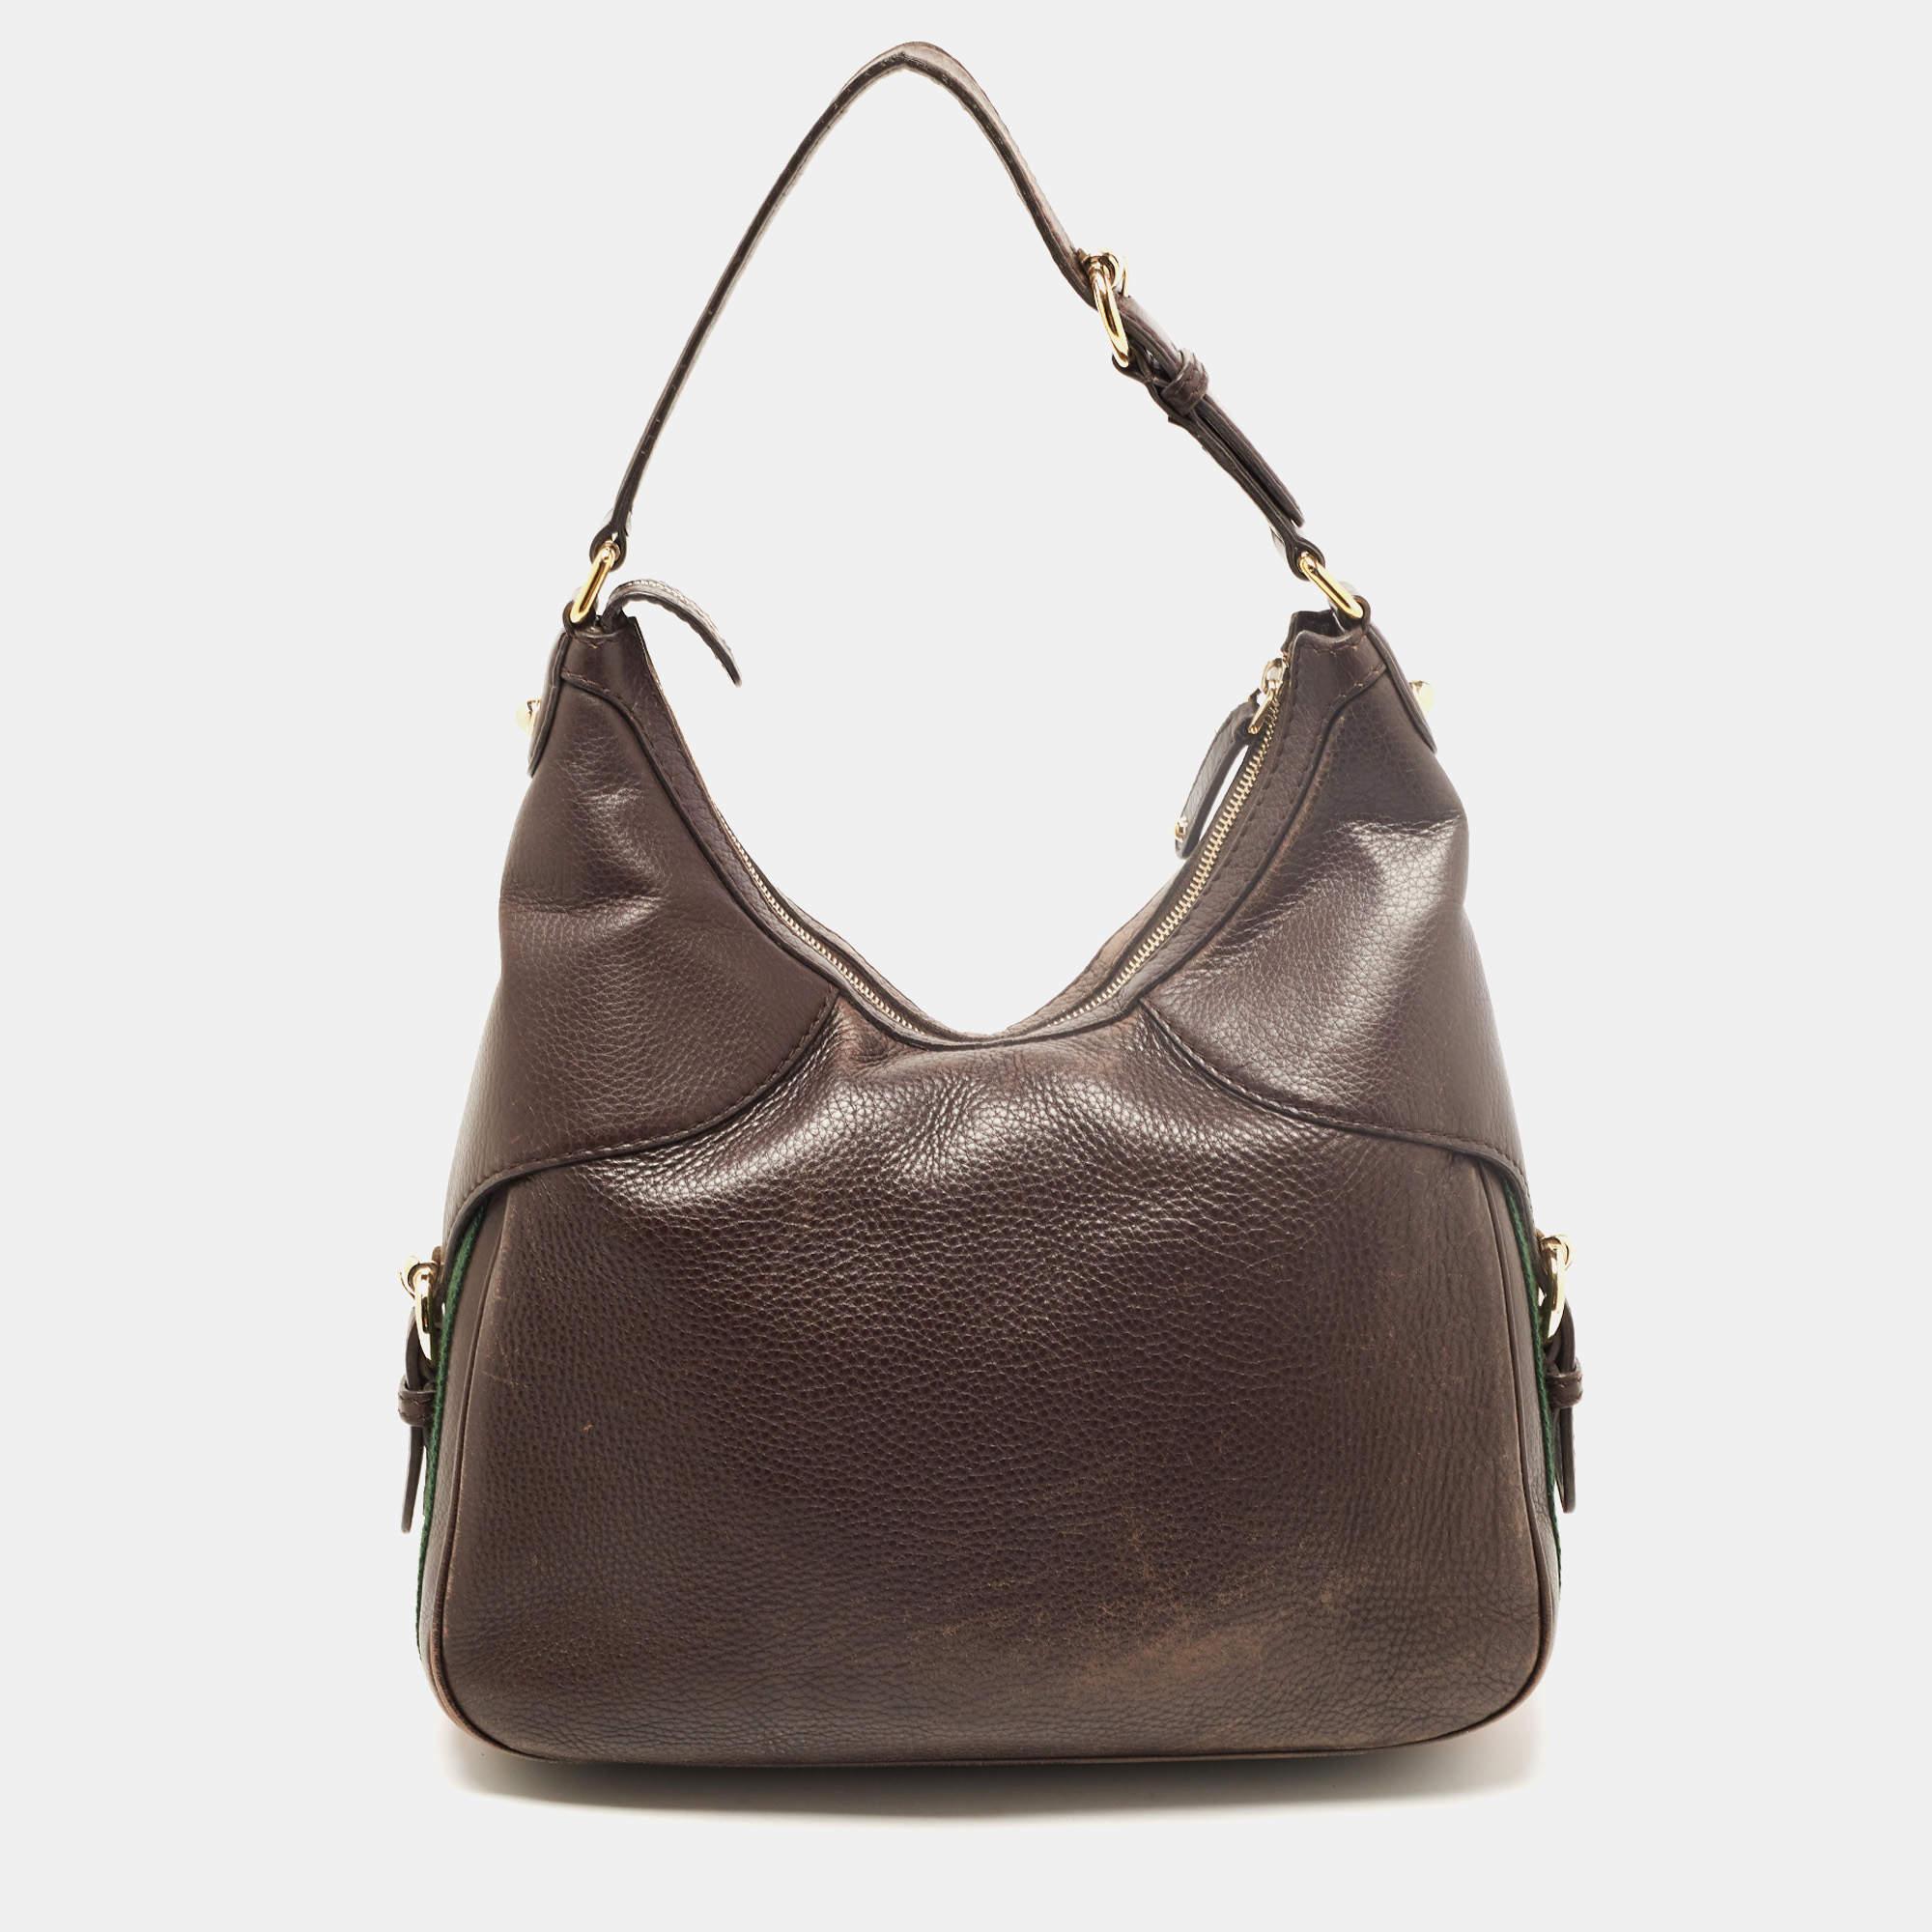 Thoughtful details, high quality, and everyday convenience mark this designer bag for women by Gucci. The bag is sewn with skill to deliver a refined look and an impeccable finish.

